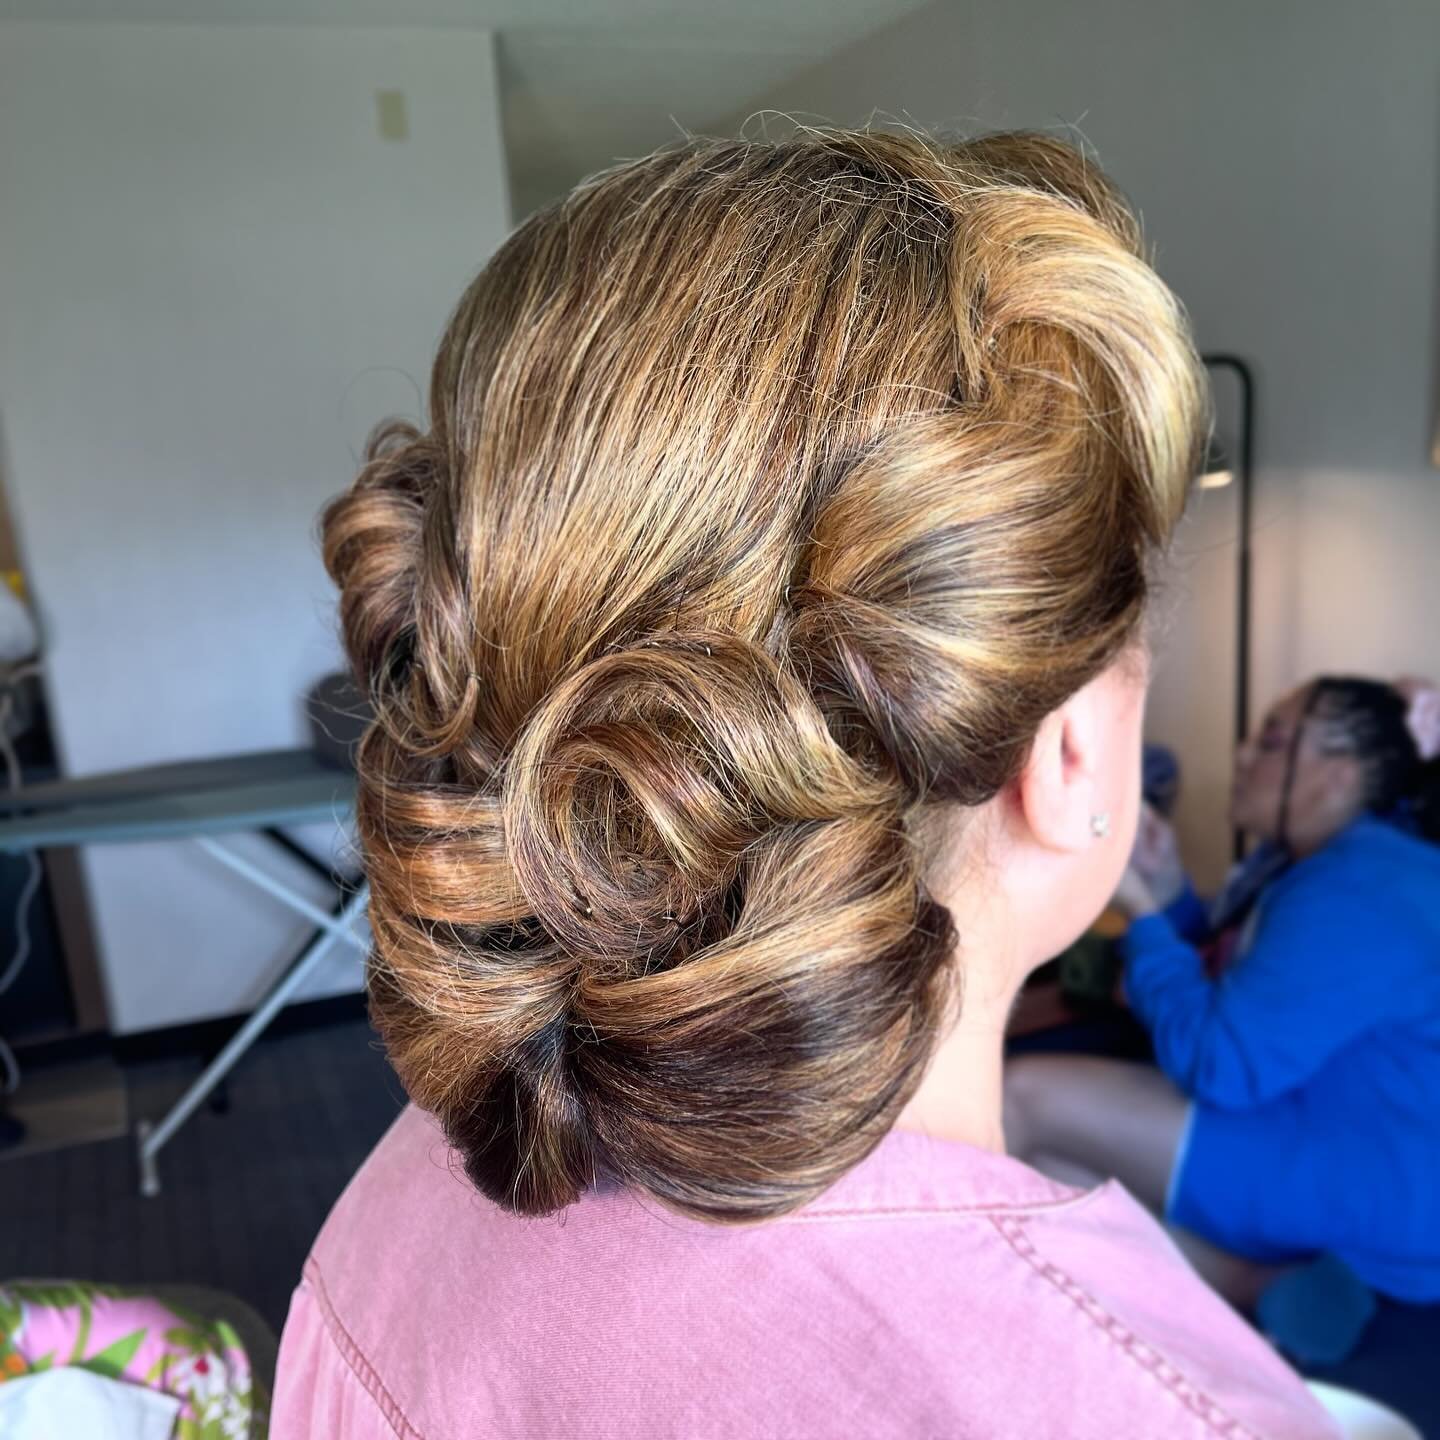 We love bringing your hair visions to life! Obsessed with this vintage updo 😍
.
Hair: Jenny
Venue: @whitbycastle